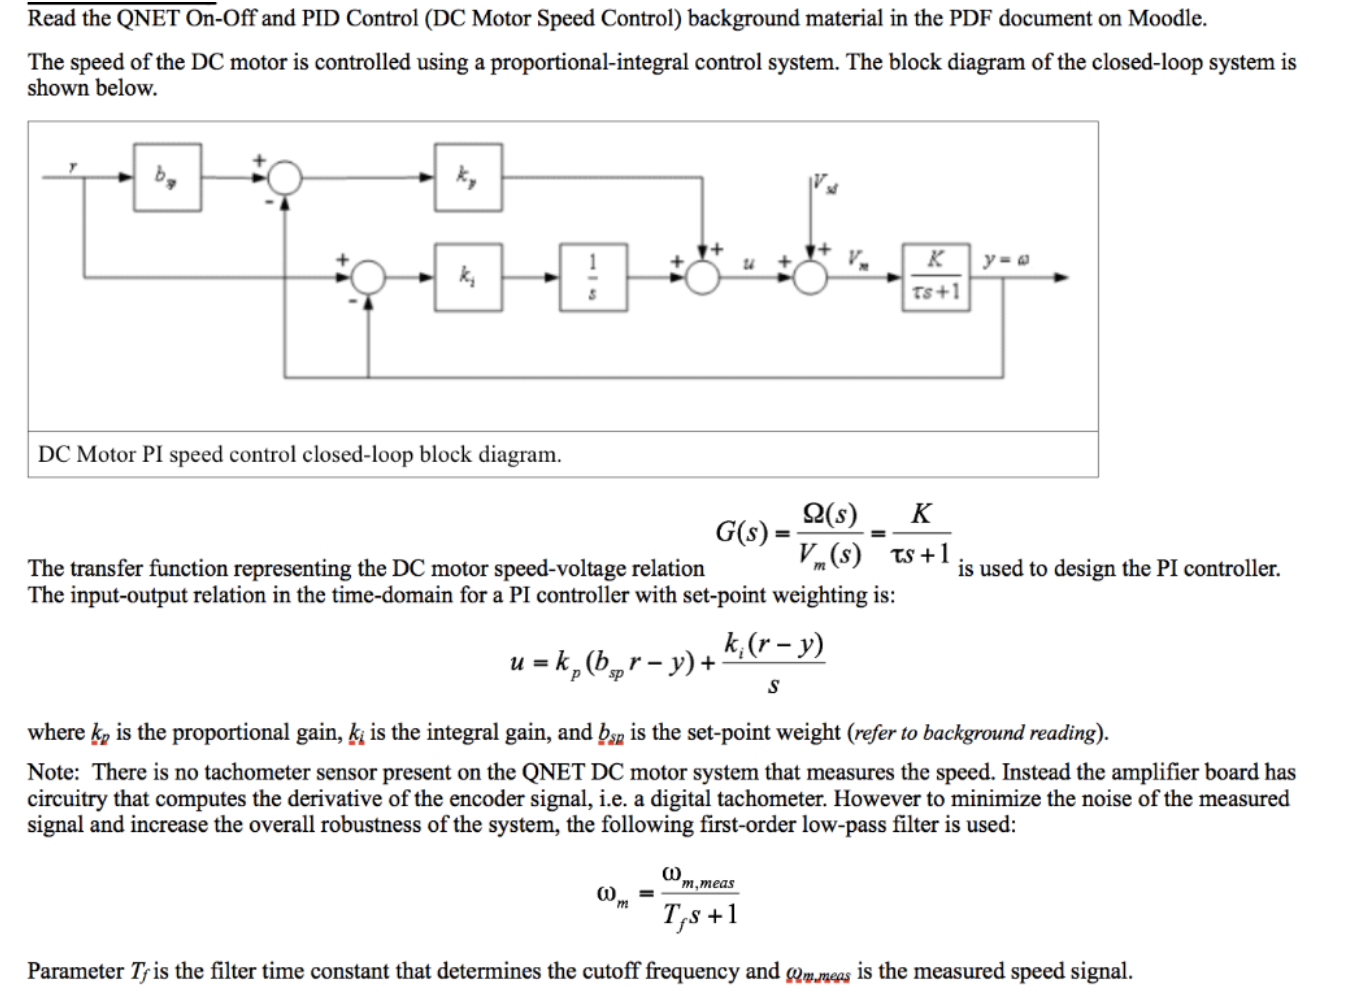 Read the QNET On-Off and PID Control (DC Motor Speed Control) background material in the PDF document on Moodle
The speed of the DC motor is controlled using a proportional-integral control system. The block diagram of the closed-loop system is
shown below.
к
y=e
Ts+1
DC Motor PI speed control closed-loop block diagram
2(s)
К
G(s)
The transfer function representing the DC motor speed-voltage relation
The input-output relation in the time-domain for a PI controller with set-point weighting is:
is used to design the PI controller
k,(r-y)
u-k, (br-y)+
sp
where k, is the proportional gain, ki is the integral gain, and bn is the set-point weight (refer to background reading)
Note: There is no tachometer sensor present on the QNET DC motor system that measures the speed. Instead the amplifier board has
circuitry that computes the derivative of the encoder signal, i.e. a digital tachometer. However to minimize the noise of the measured
signal and increase the overall robustness of the system, the following first-order low-pass filter is used:
m,meas
T,s+
Parameter Tyis the filter time constant that determines the cutoff frequency and mmeas is the measured speed signal
